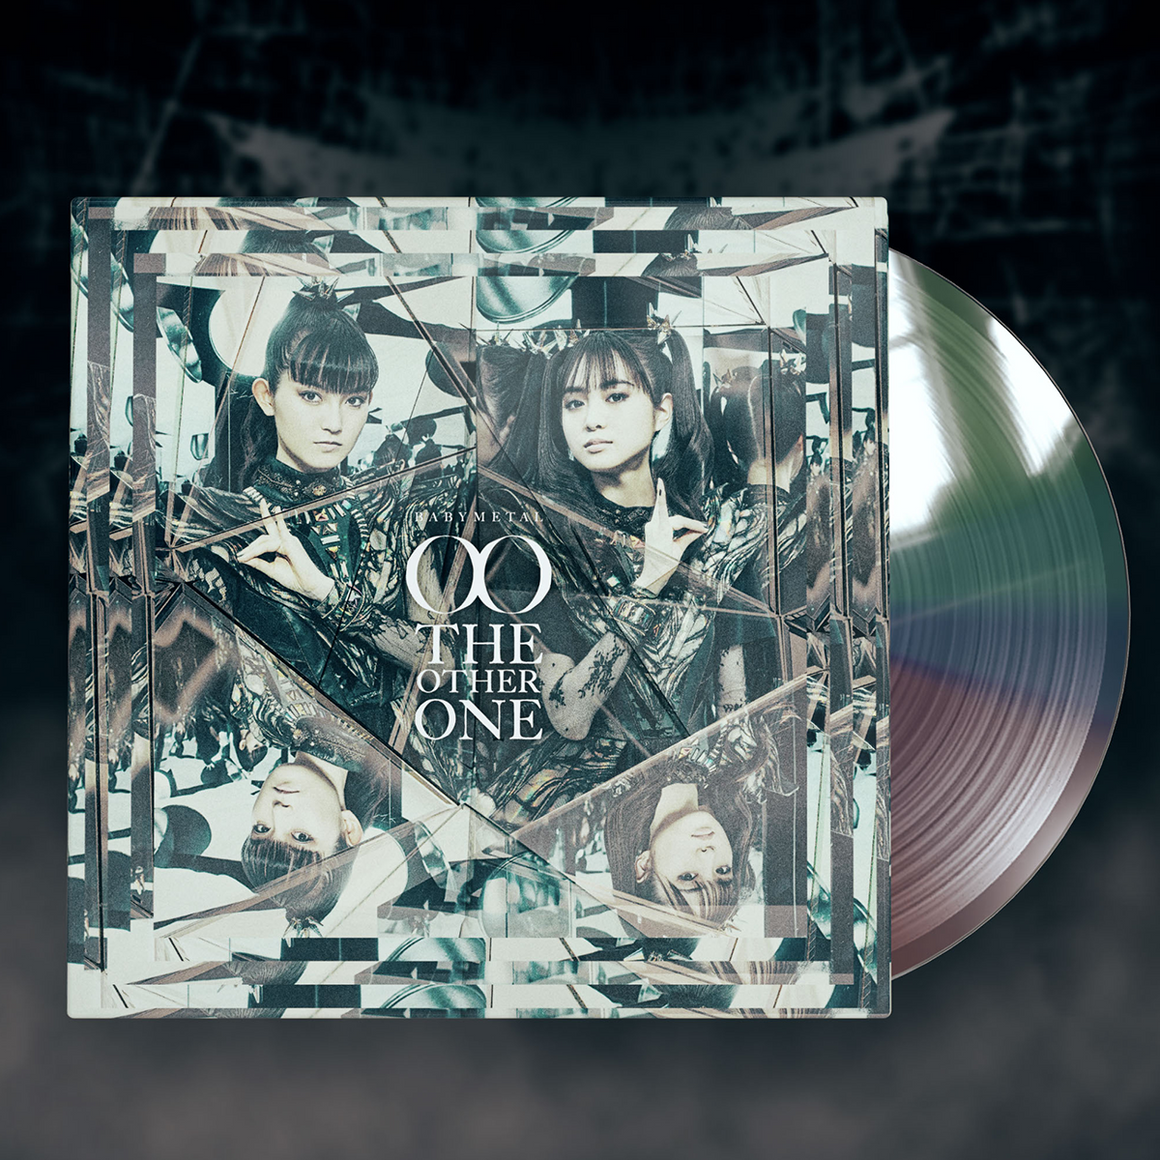 THE OTHER ONE CD - INVERTED MIRROR REFLECTION VERSION (BABYMETAL STORE EXCLUSIVE)